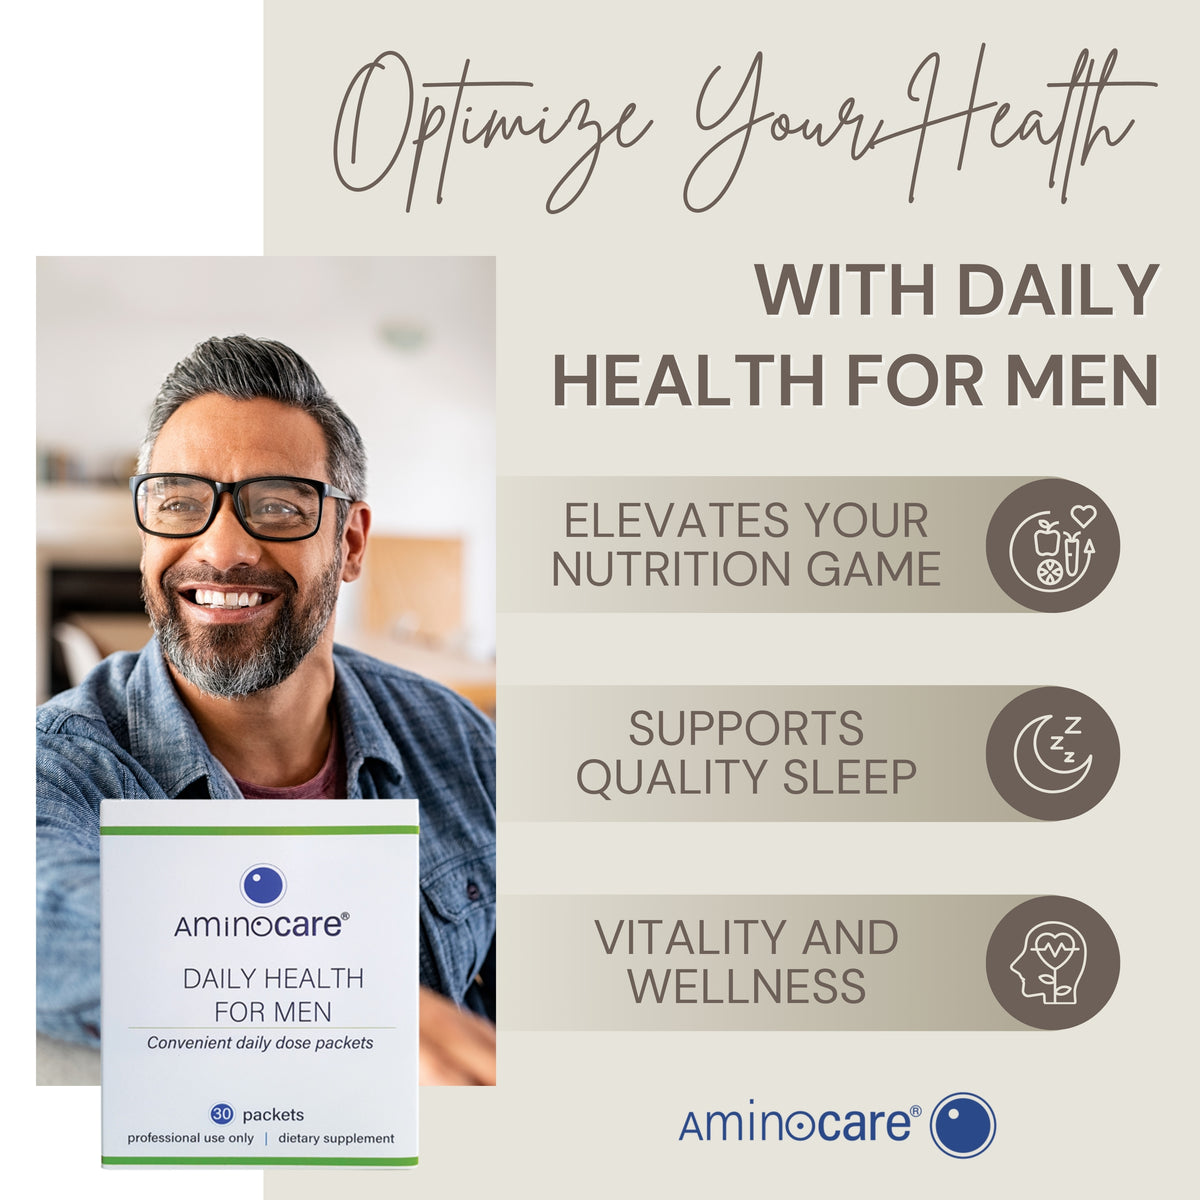 Optimize Your Health with Daily Health for Men Supplements